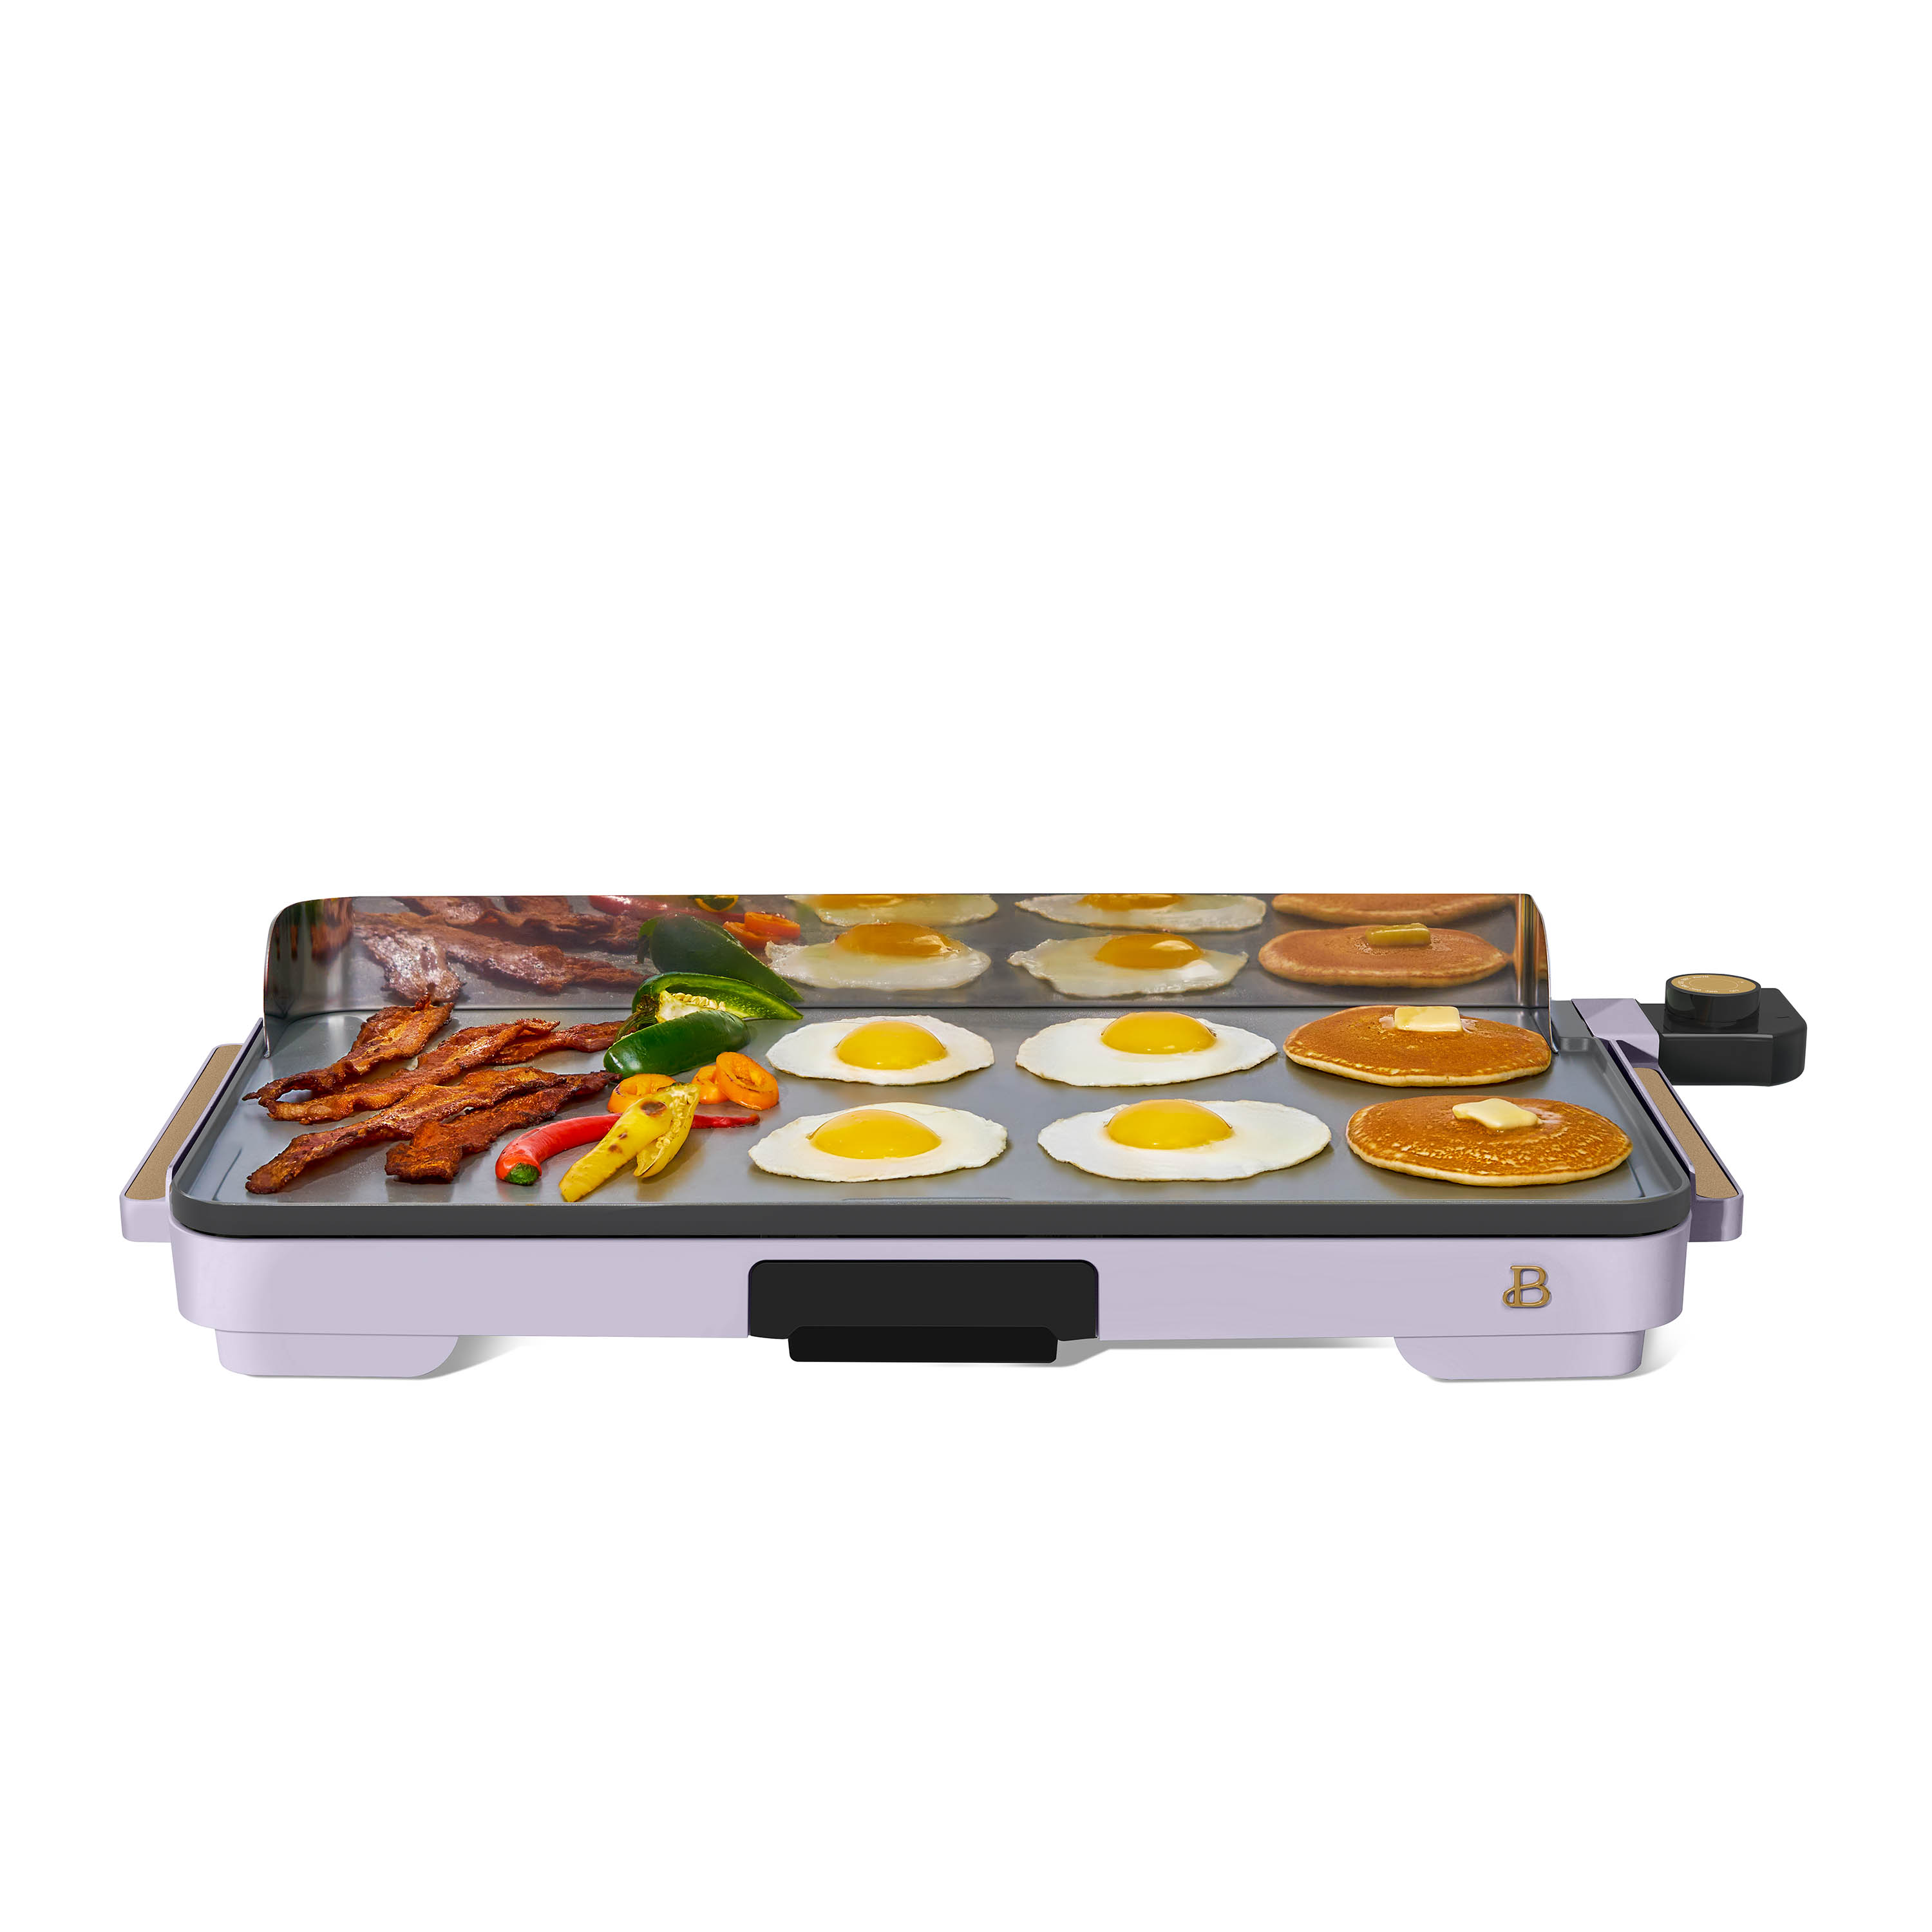 Beautiful XL Electric Griddle 12" x 22"- Non-Stick, Lavender by Drew Barrymore - image 3 of 6